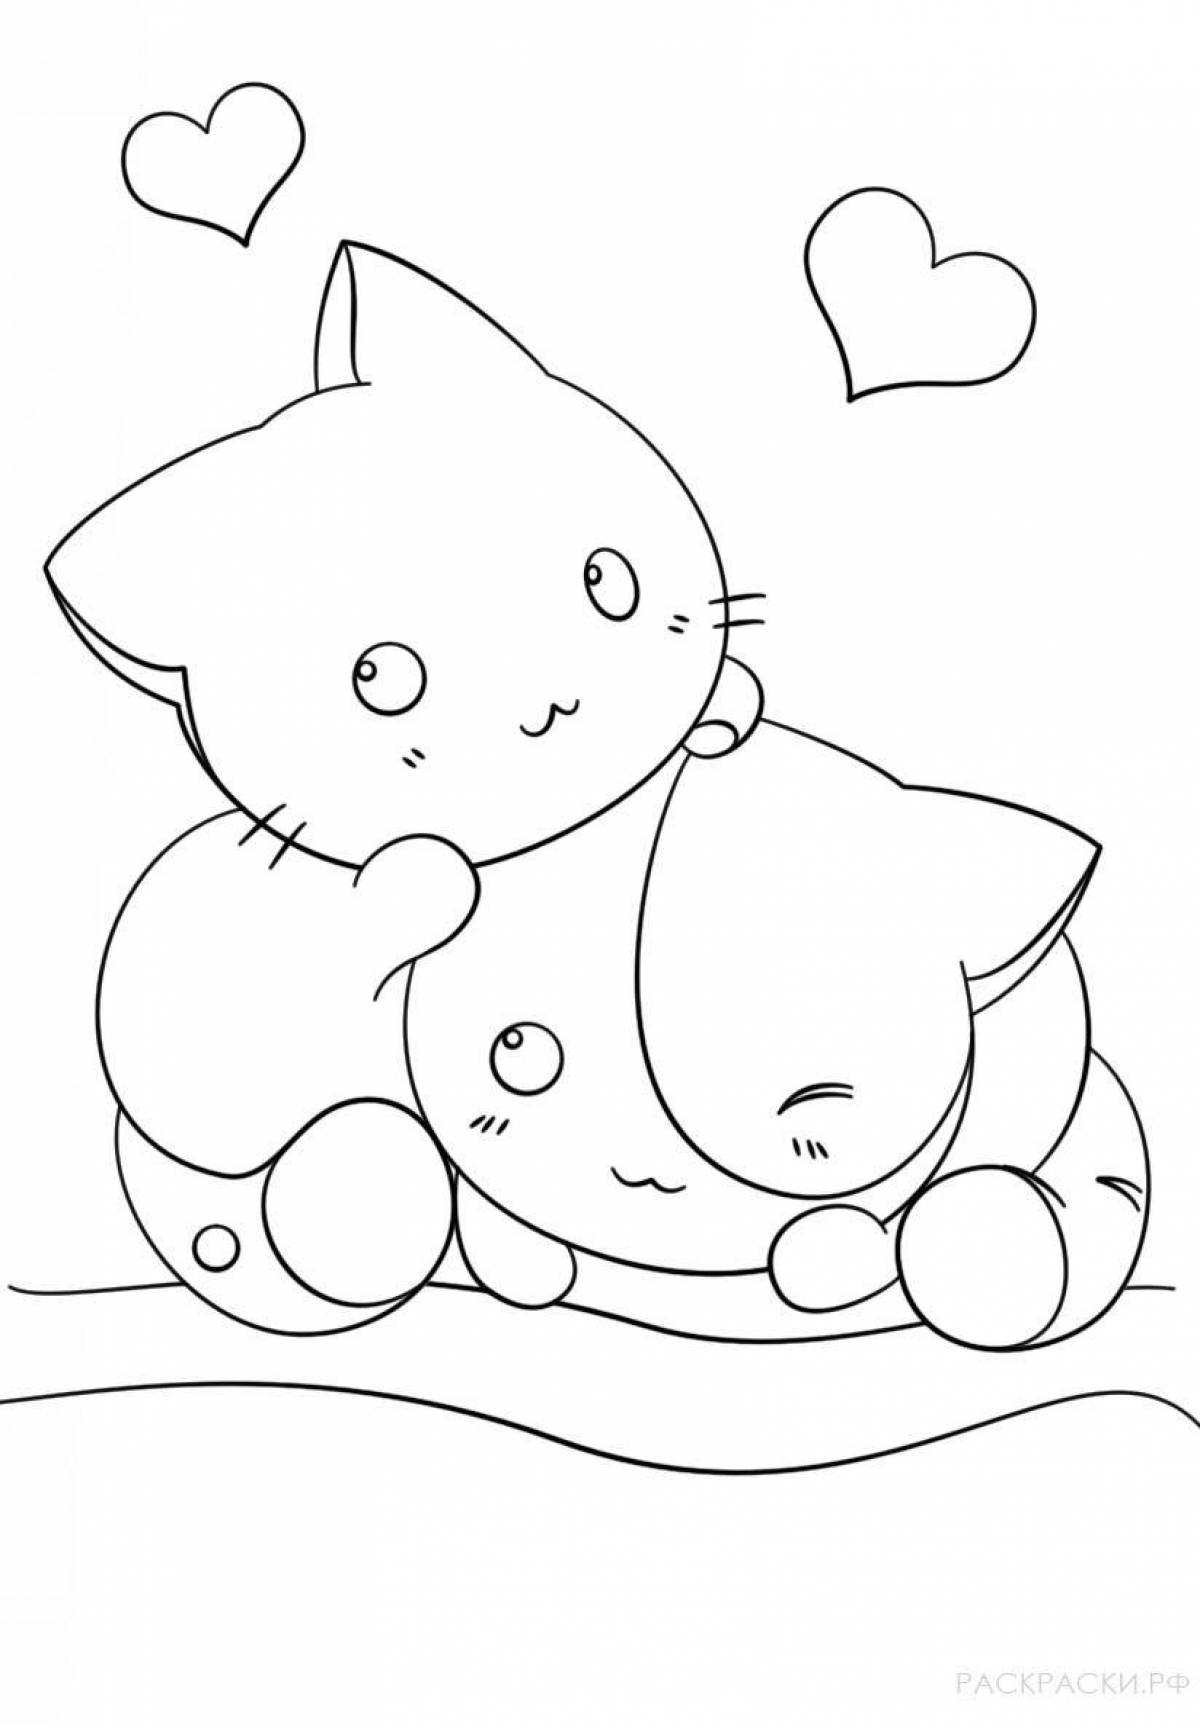 Cute and adorable cat coloring page